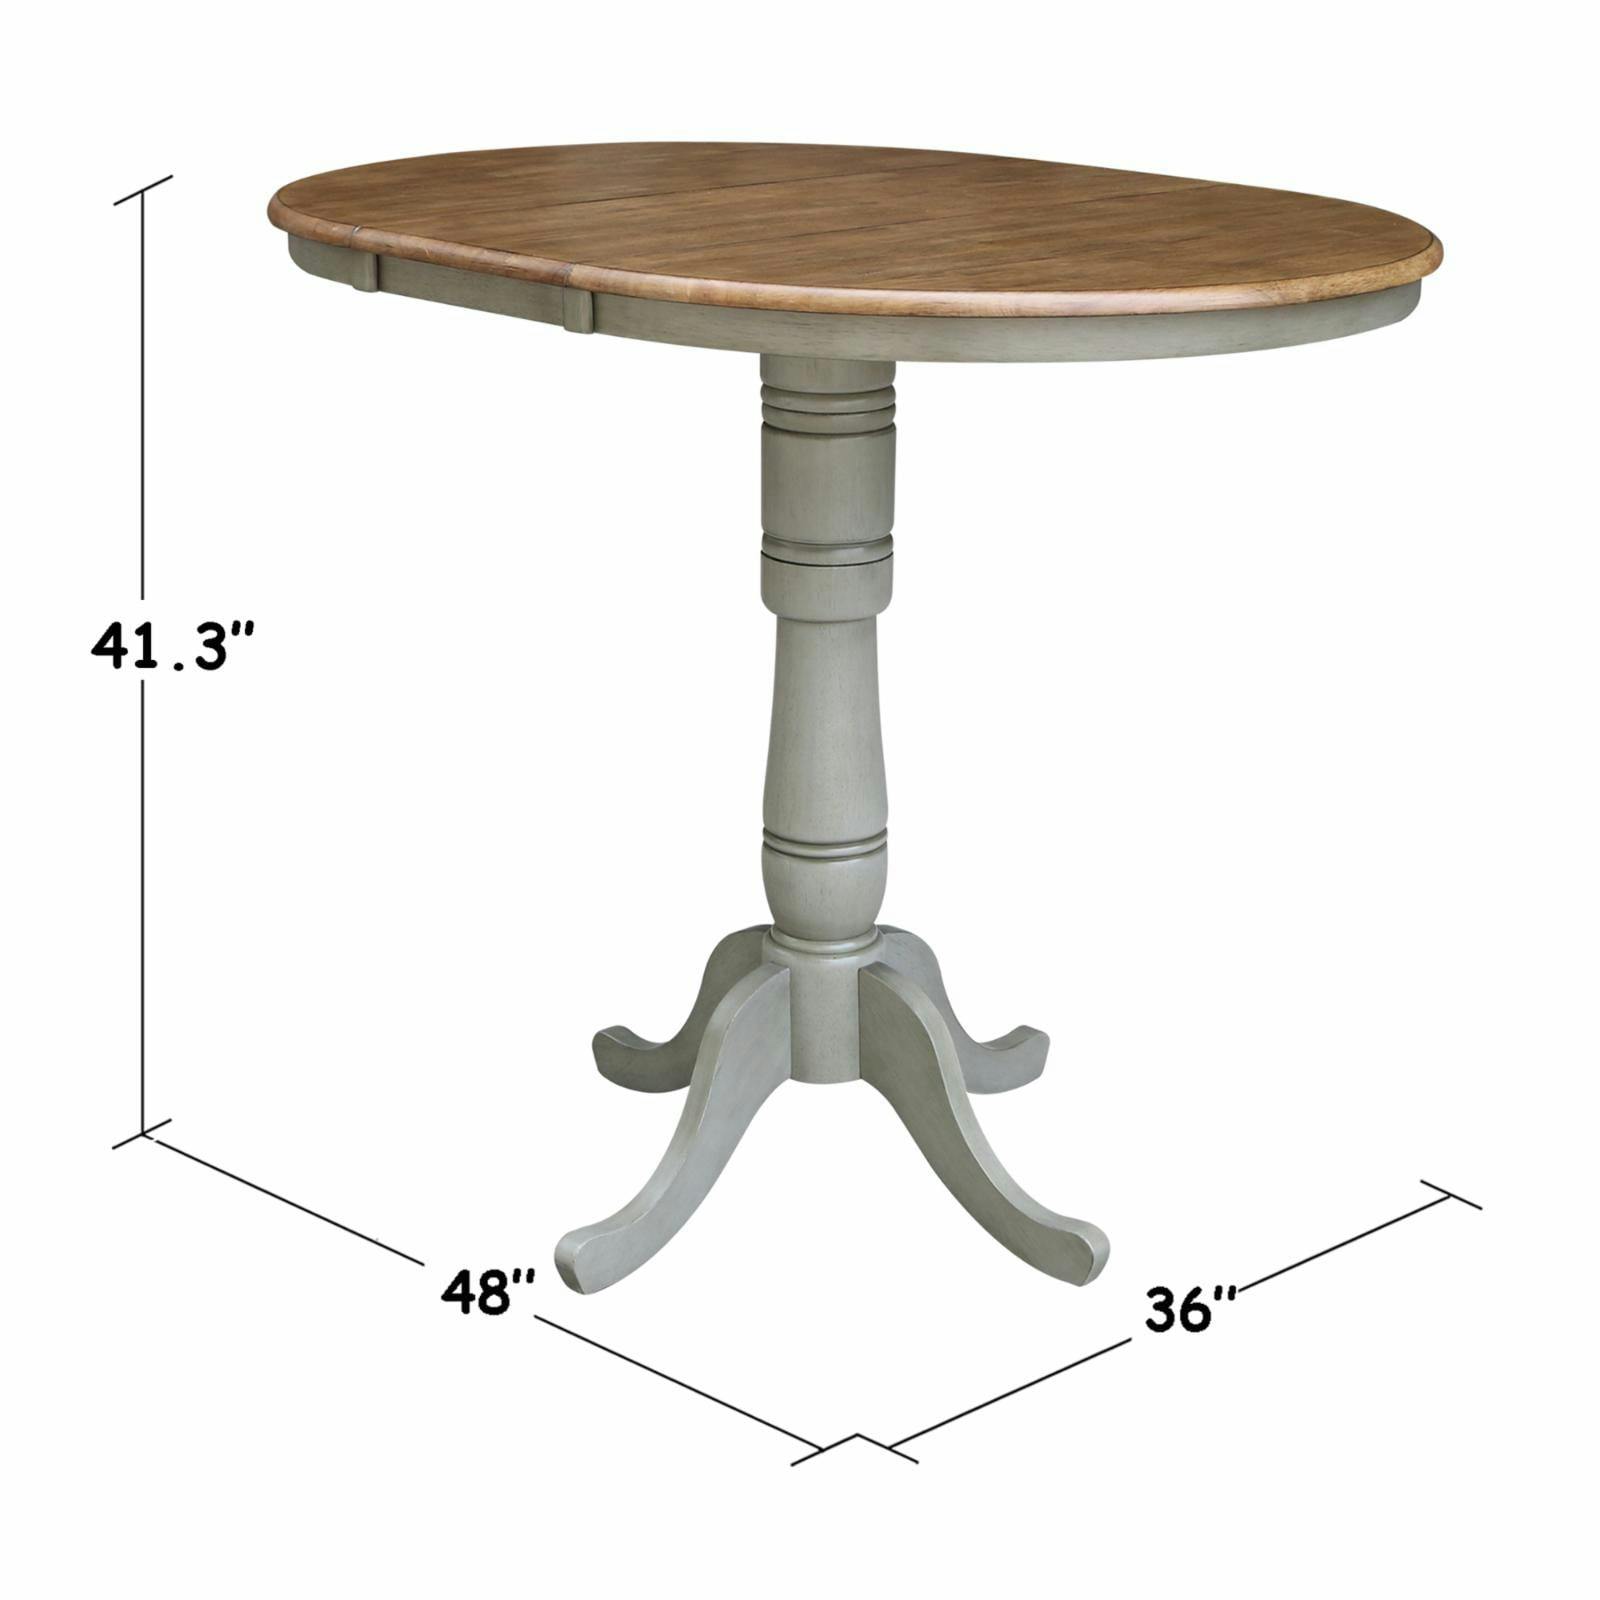 Farmhouse Round Wood Extendable Bar Height Table in Distressed Hickory